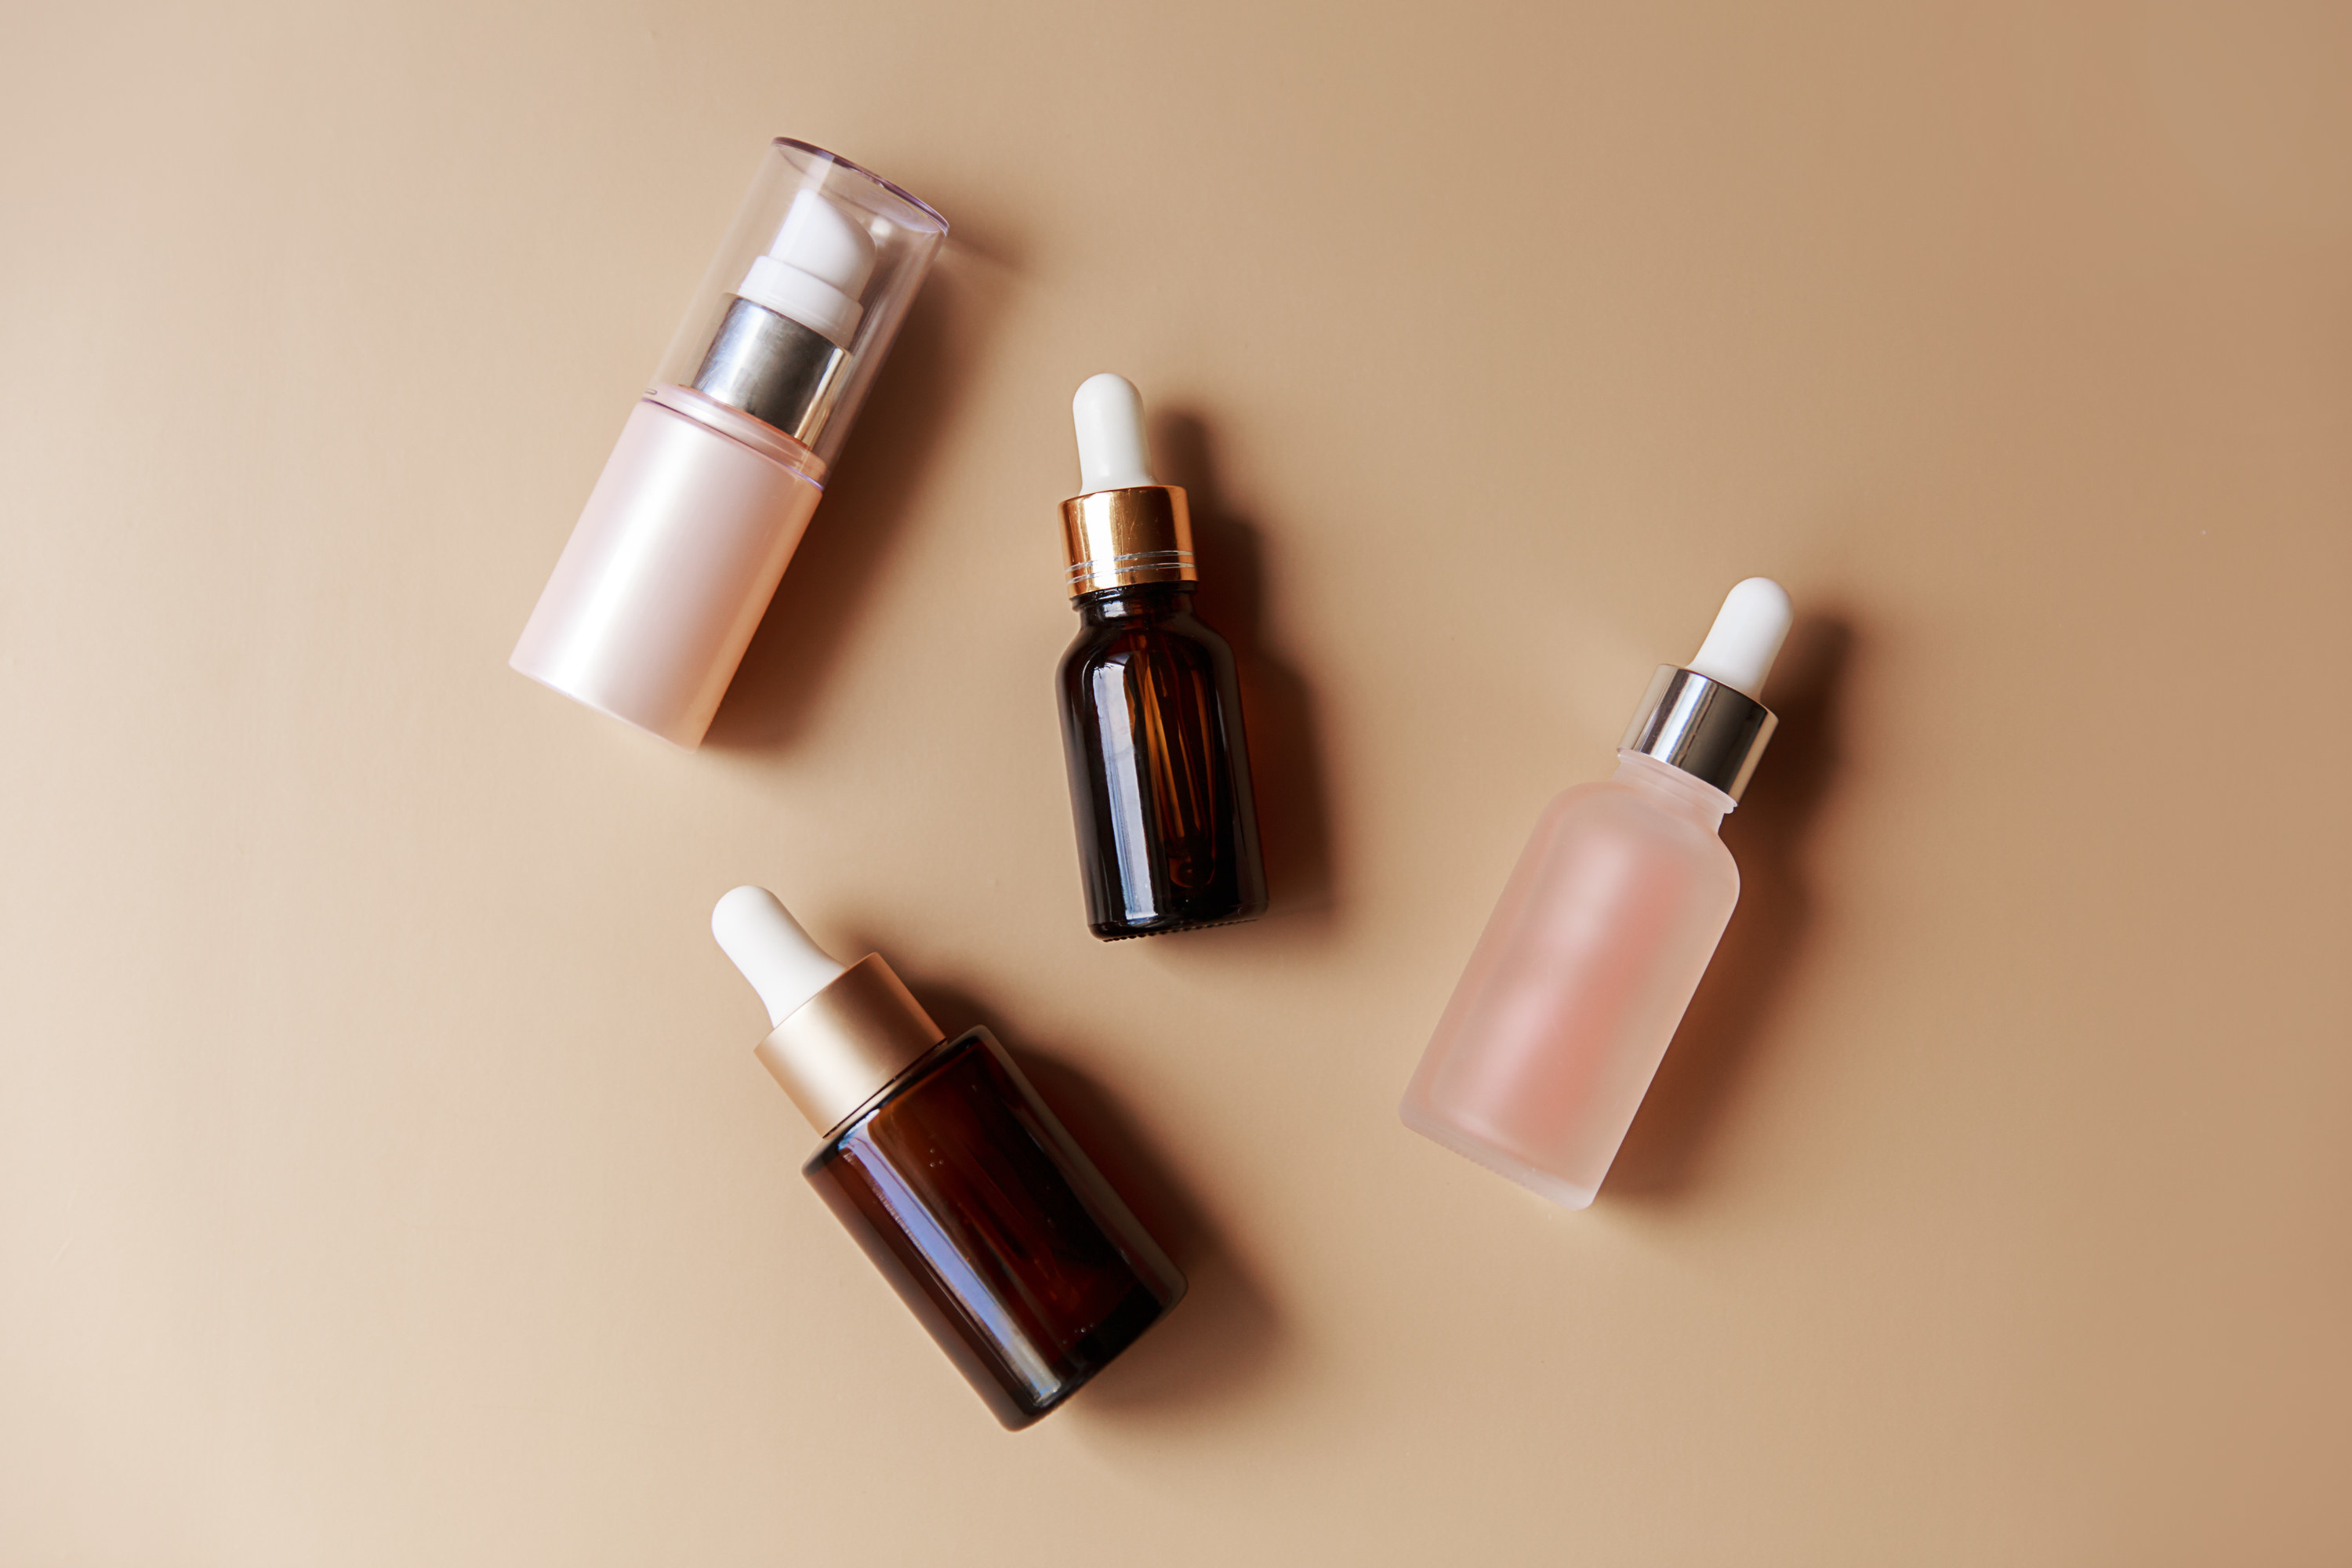 Cosmetic bottles laying against a beige background